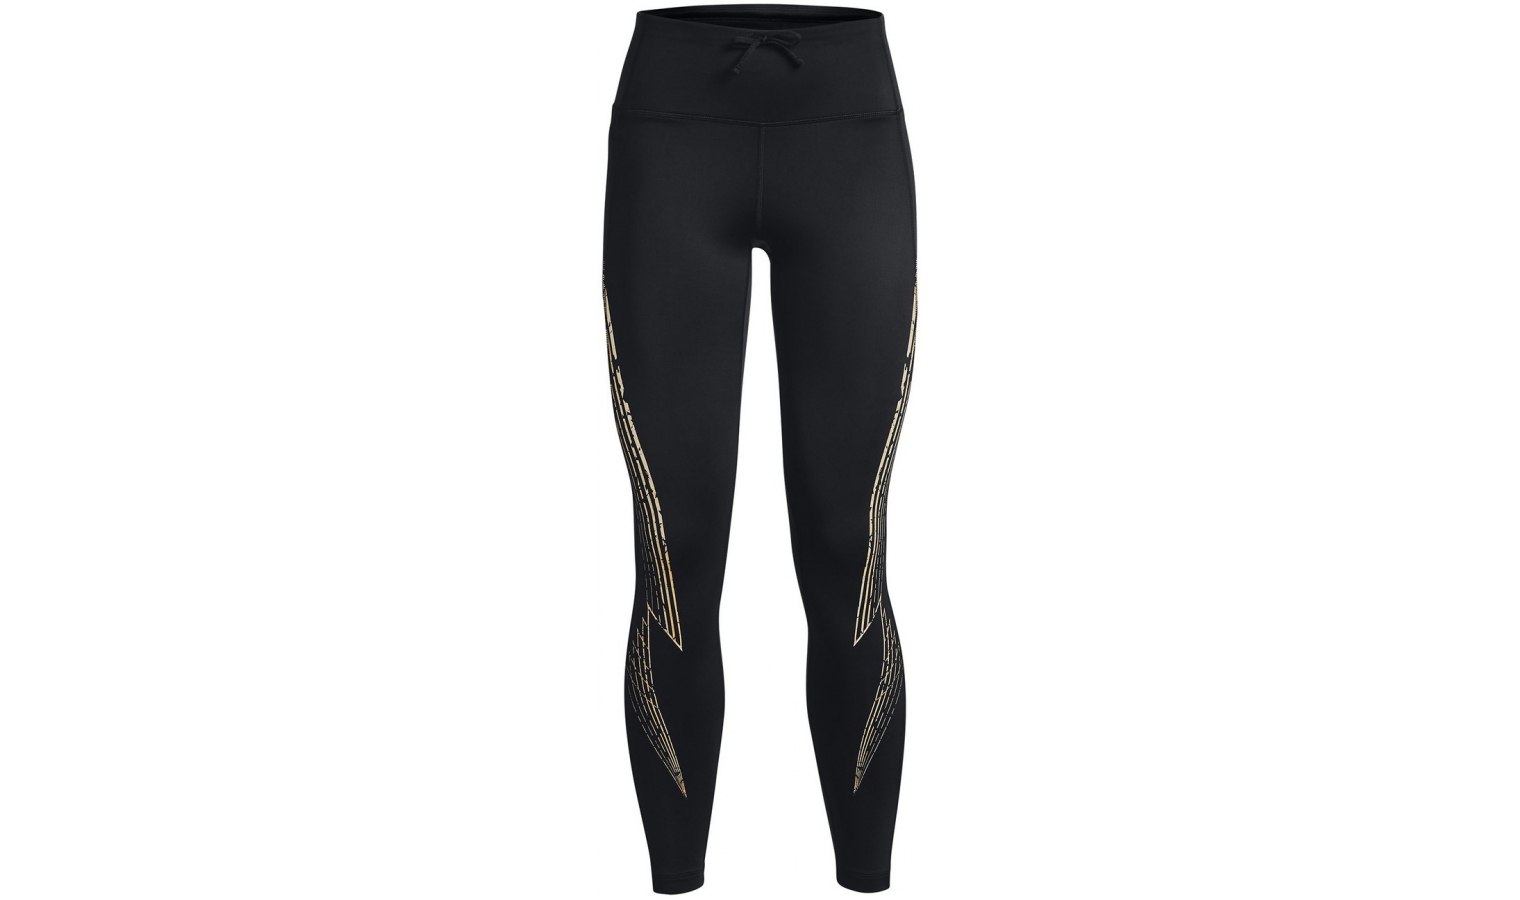 Womens compression leggings Under Armour OUTRUN THE COLD TIGHT W black